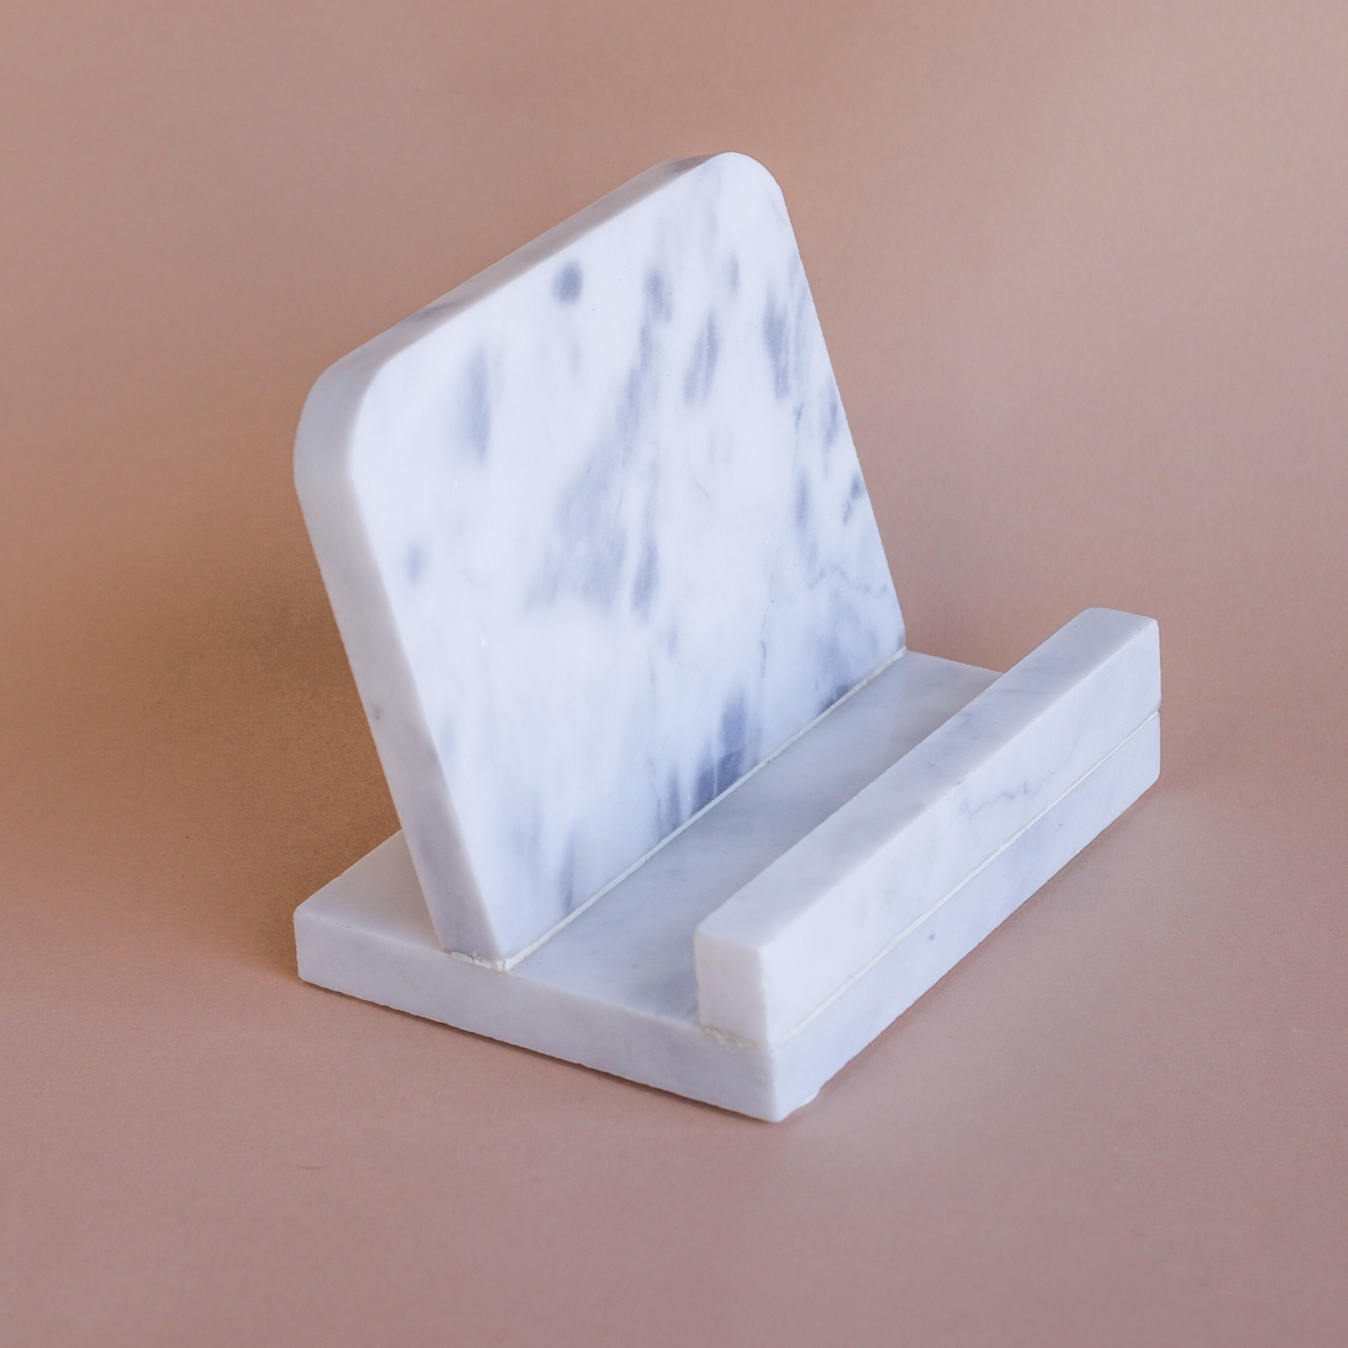 A white marble cookbook stand photographed in front of a mocha brown background.